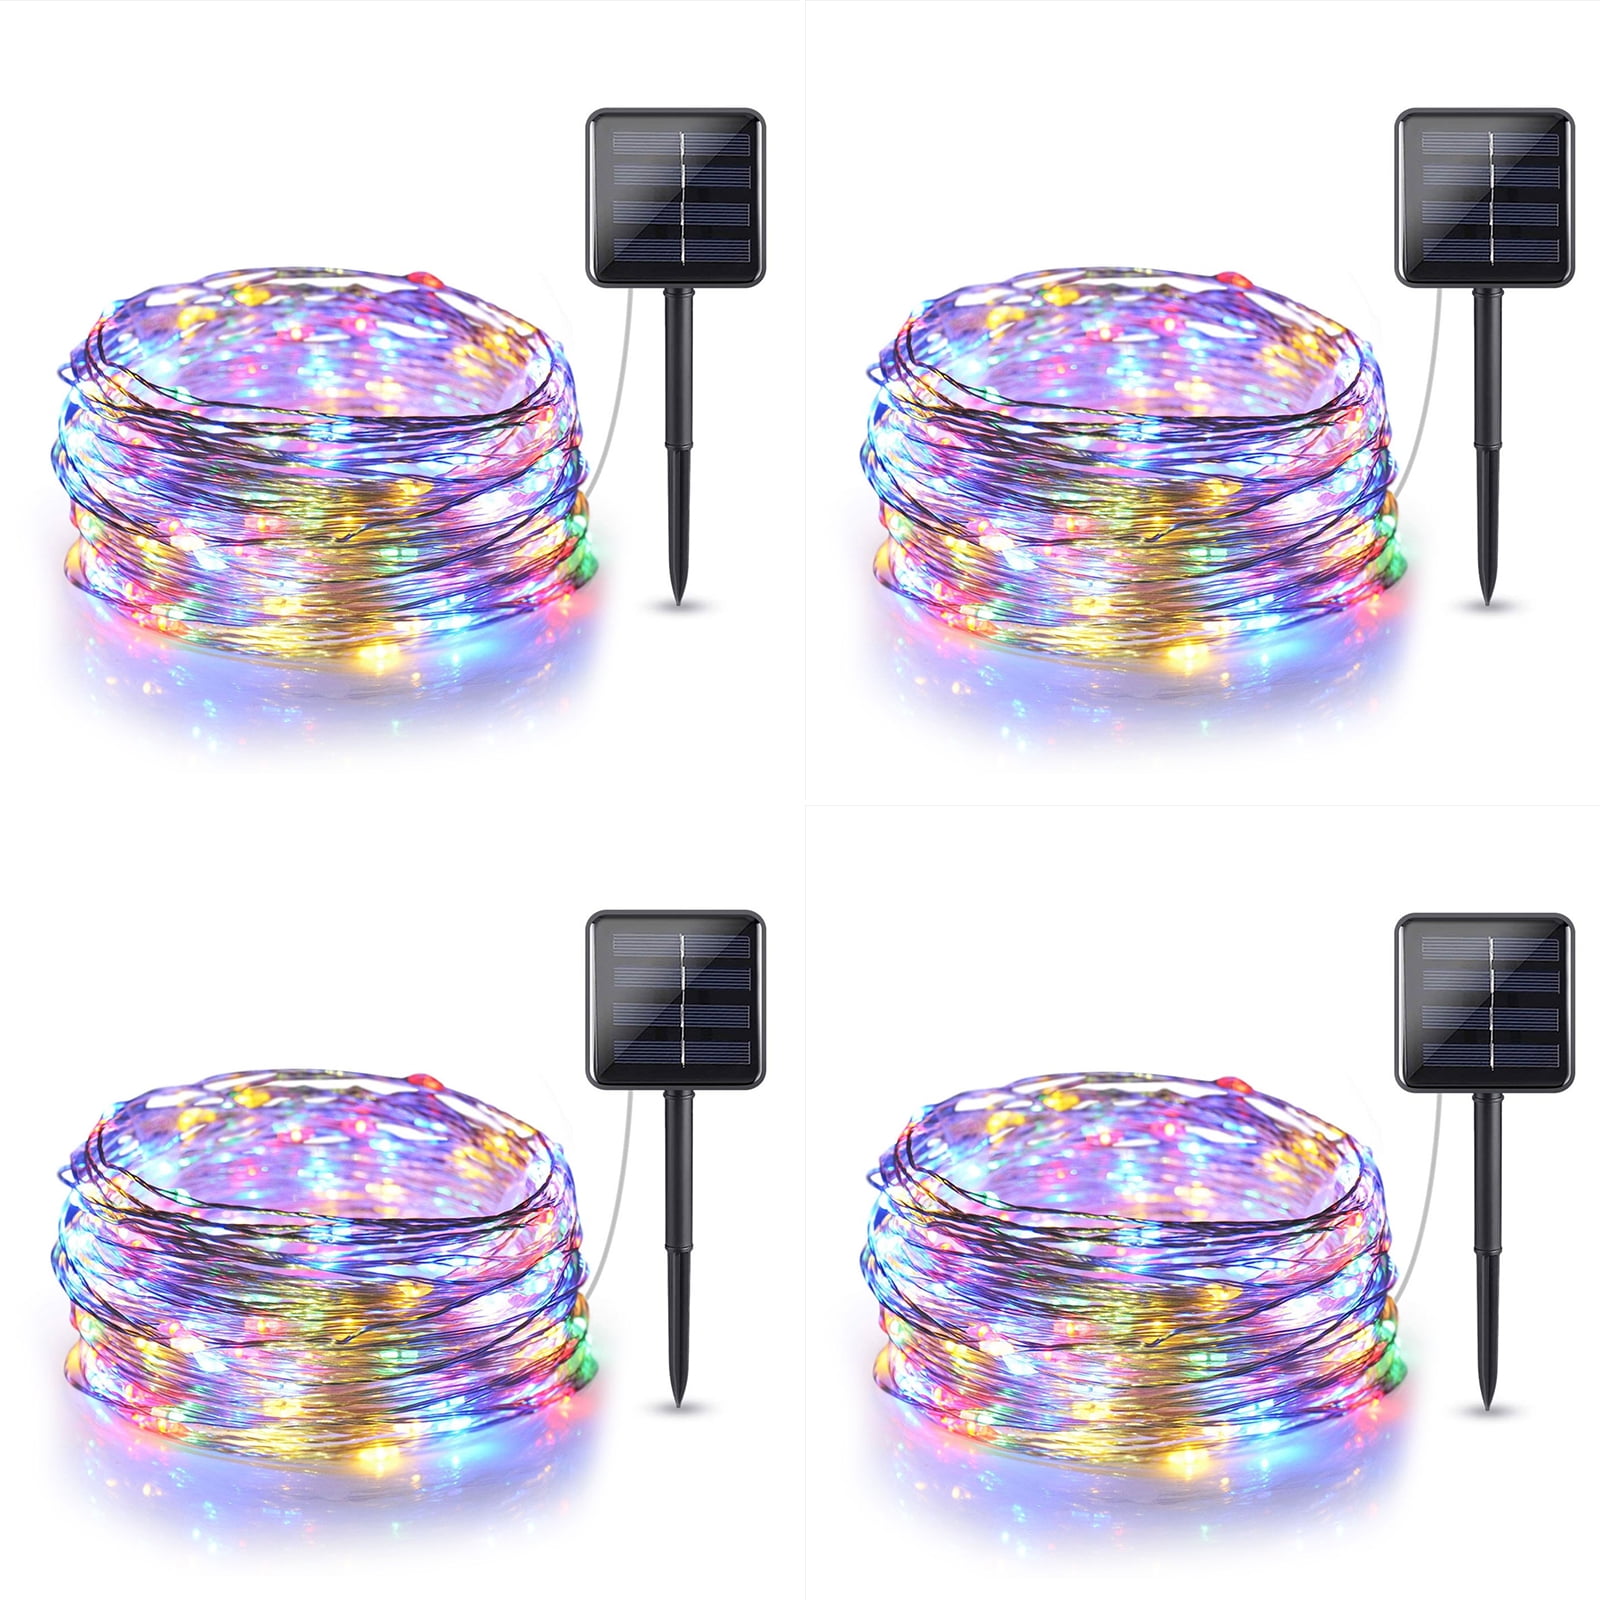 Solar Powered String Lights 100 LED Copper Wire Outdoor Garden Party Waterproof 